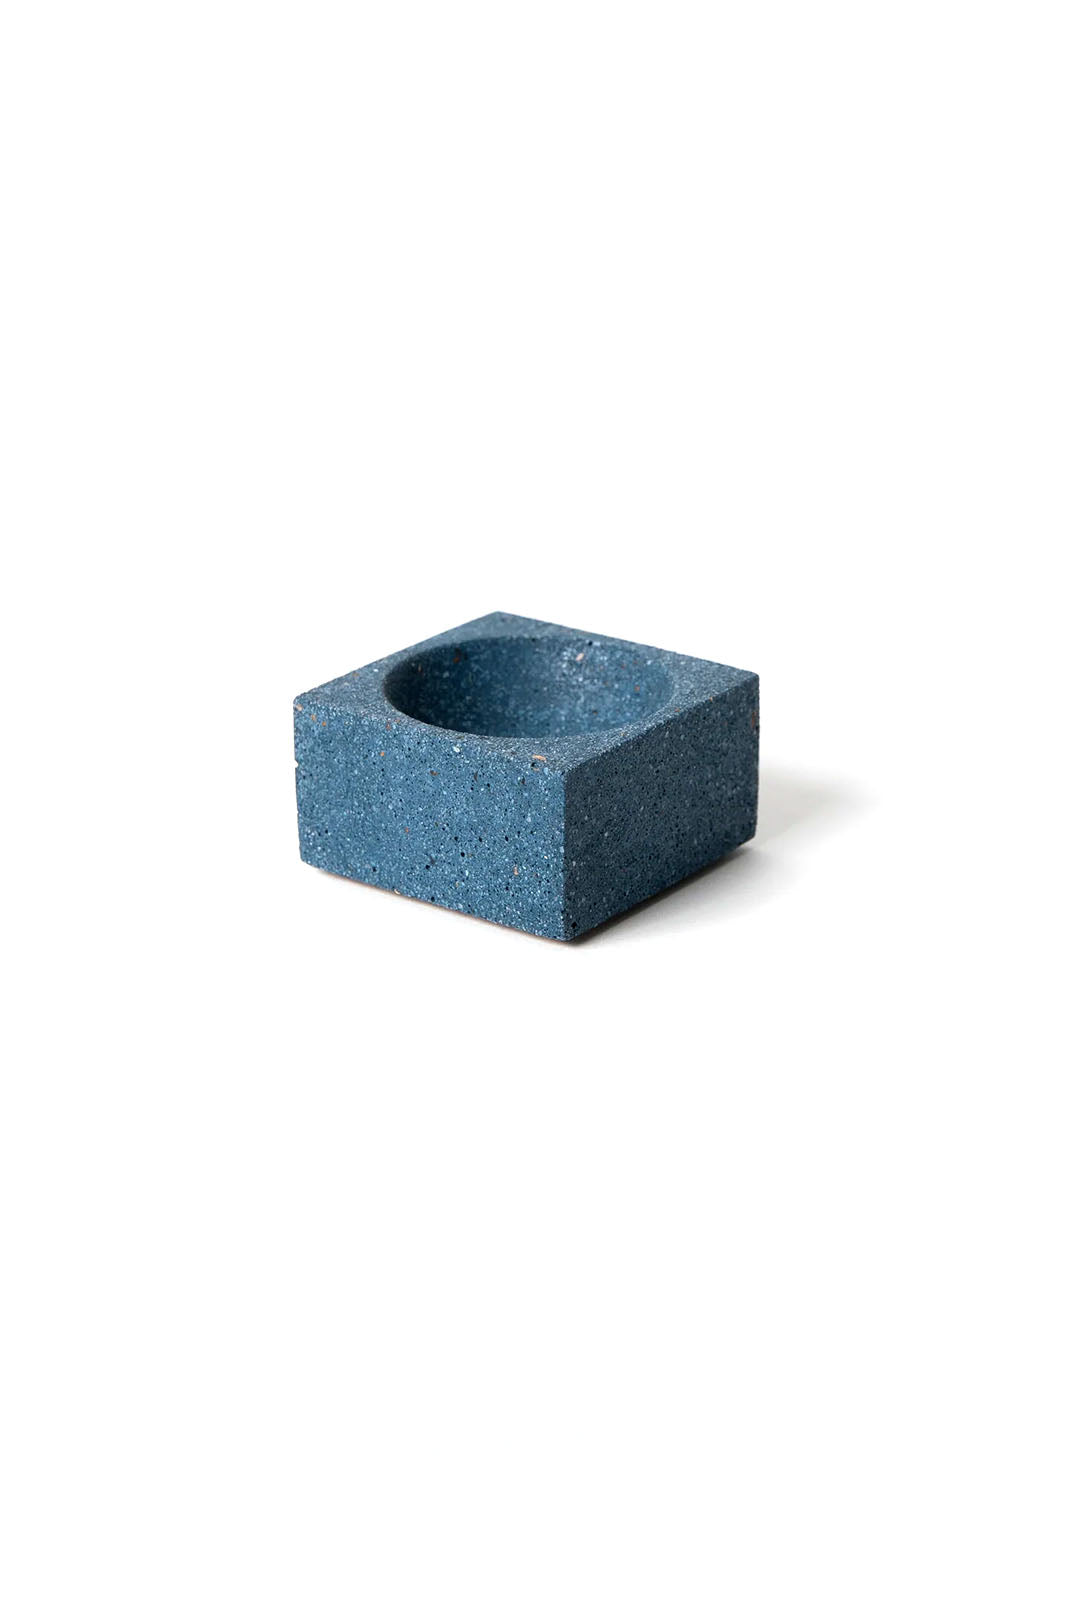 Cobalt blue concrete terrazzo square incense holder with a rounded inset center for the incense stick or cone